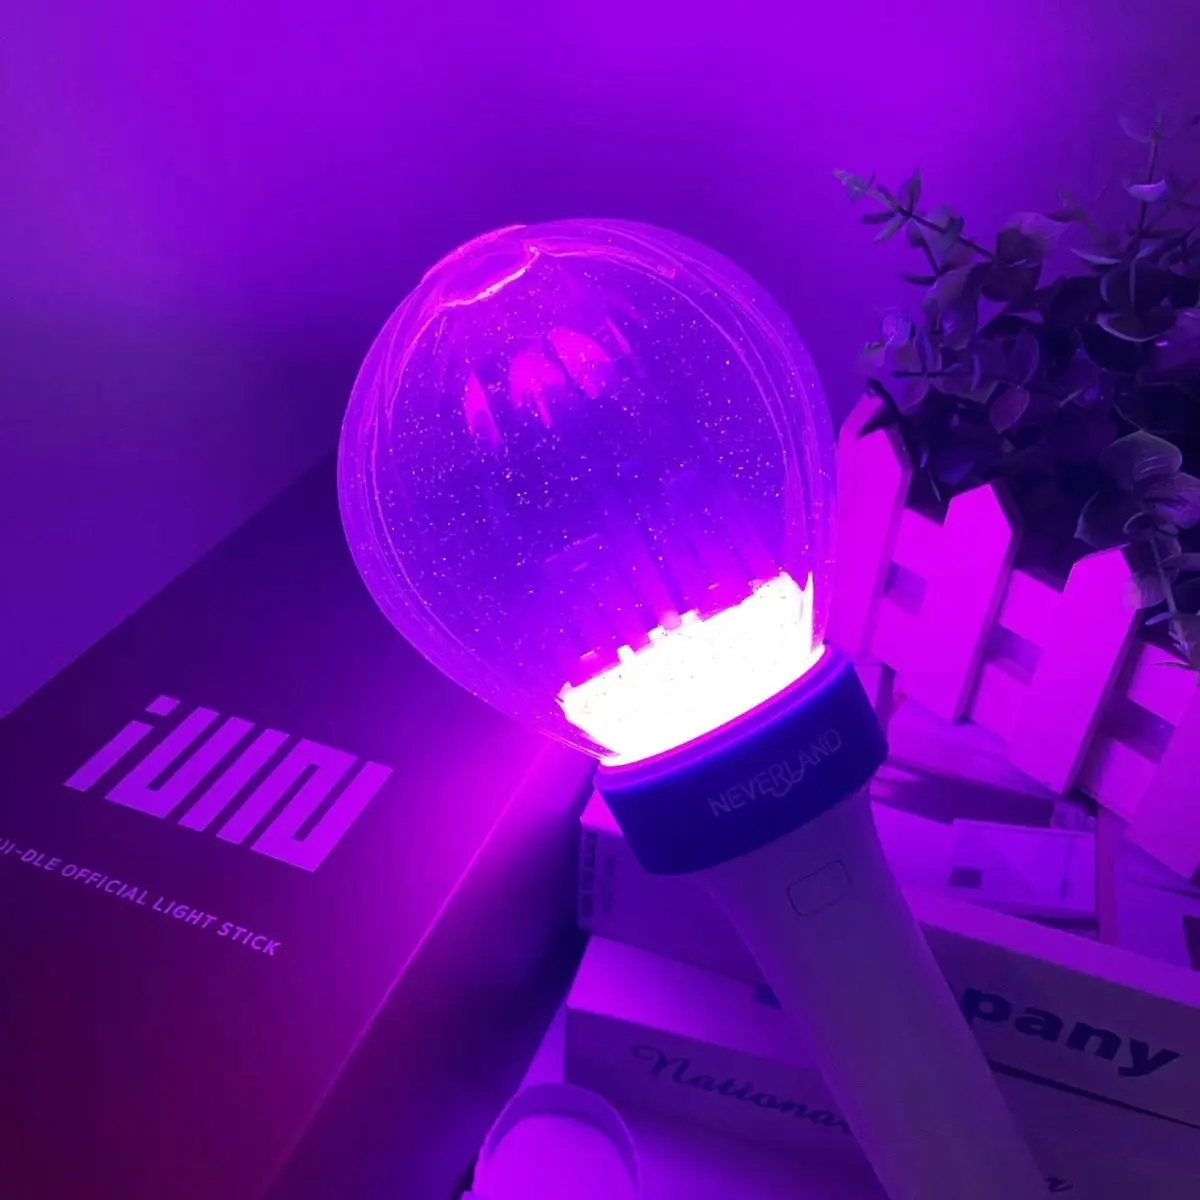 GIRL (G) I-DLE LIGHT STICK Ver.2 OFFICIAL + Tracking